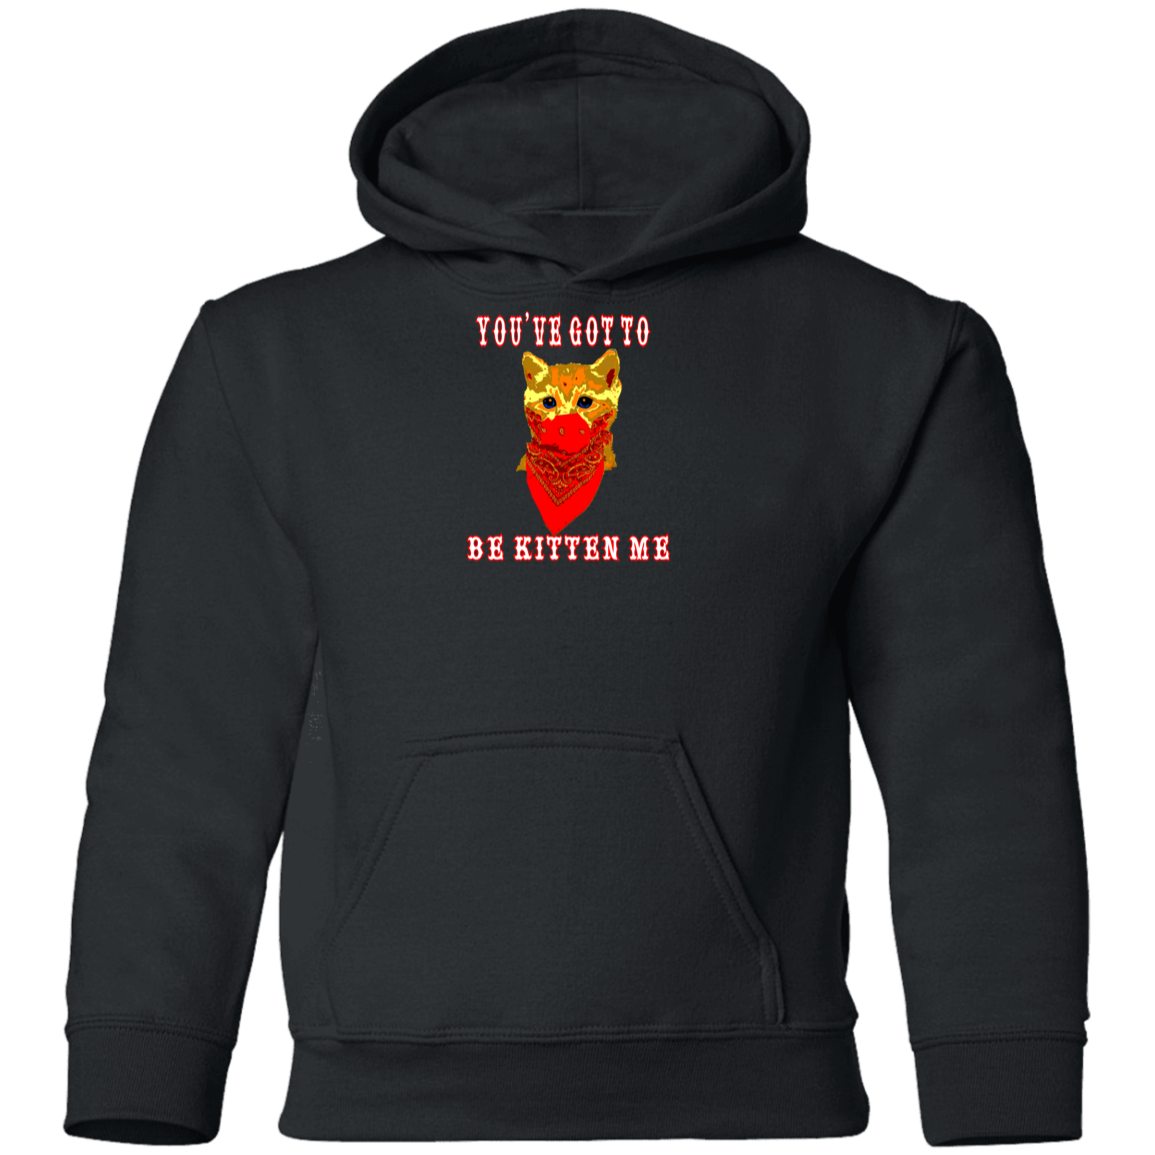 ArtichokeUSA Custom Design. You've Got To Be Kitten Me?! 2020, Not What We Expected. Youth Pullover Hoodie